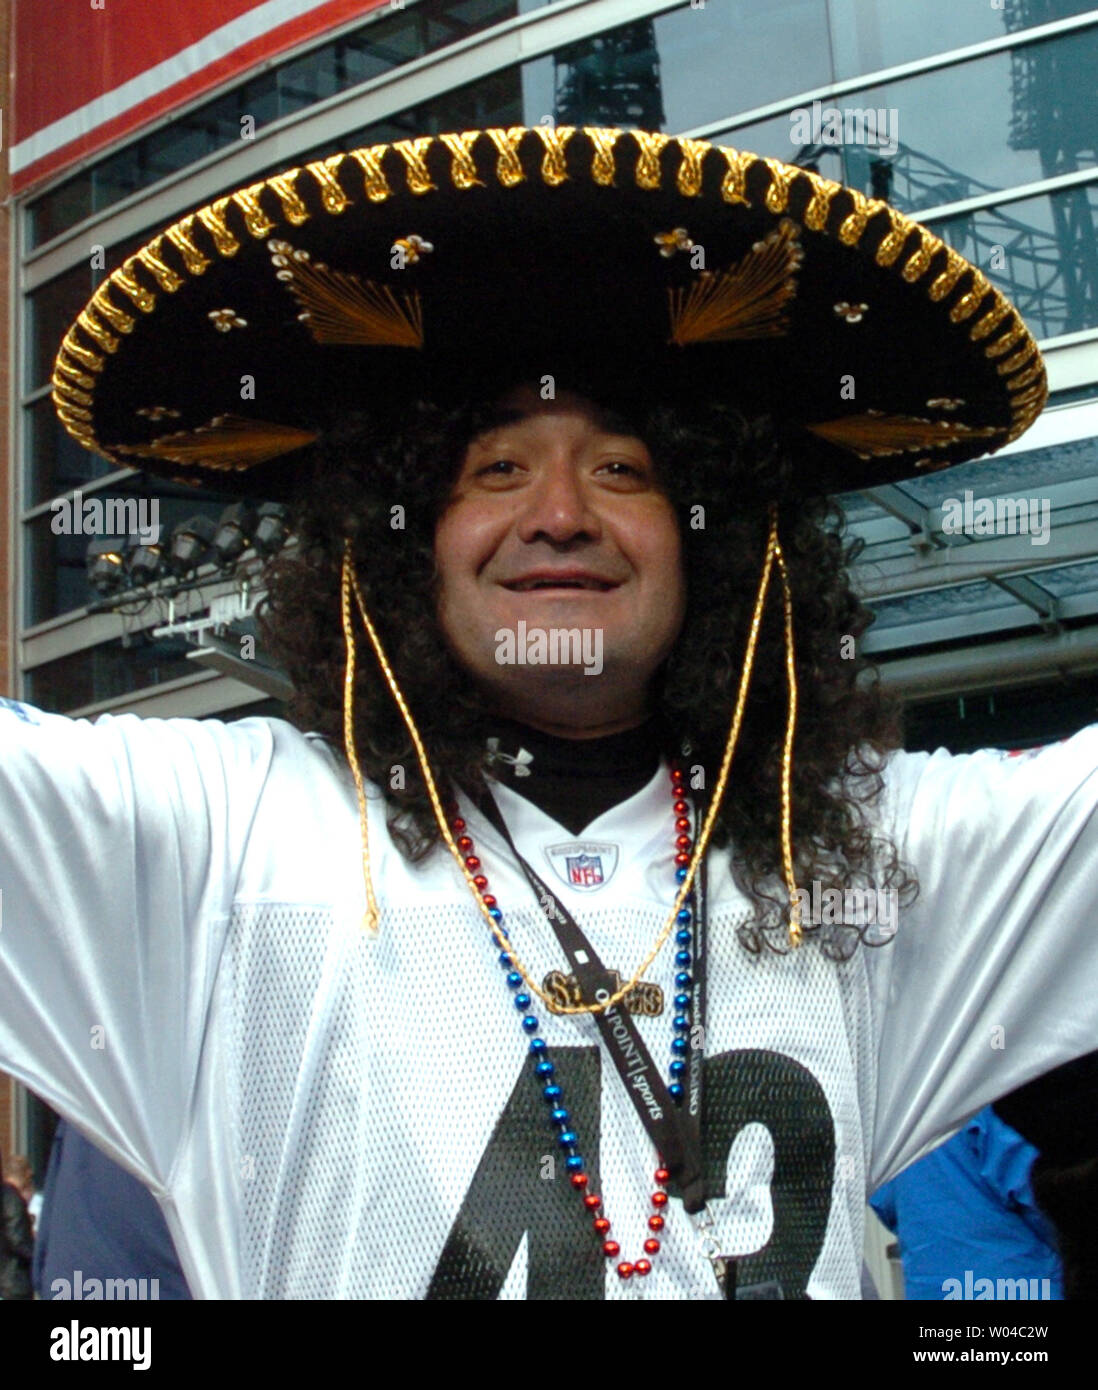 Steelers fan Salvador Perches from Juarez, Mexico arrives at Super Bowl XL  featuring the Seattle Seahawks and the Pittsburgh Steelers at Ford Field in  Detroit, Mi., on February 5, 2006. (UPI Photo/Pat